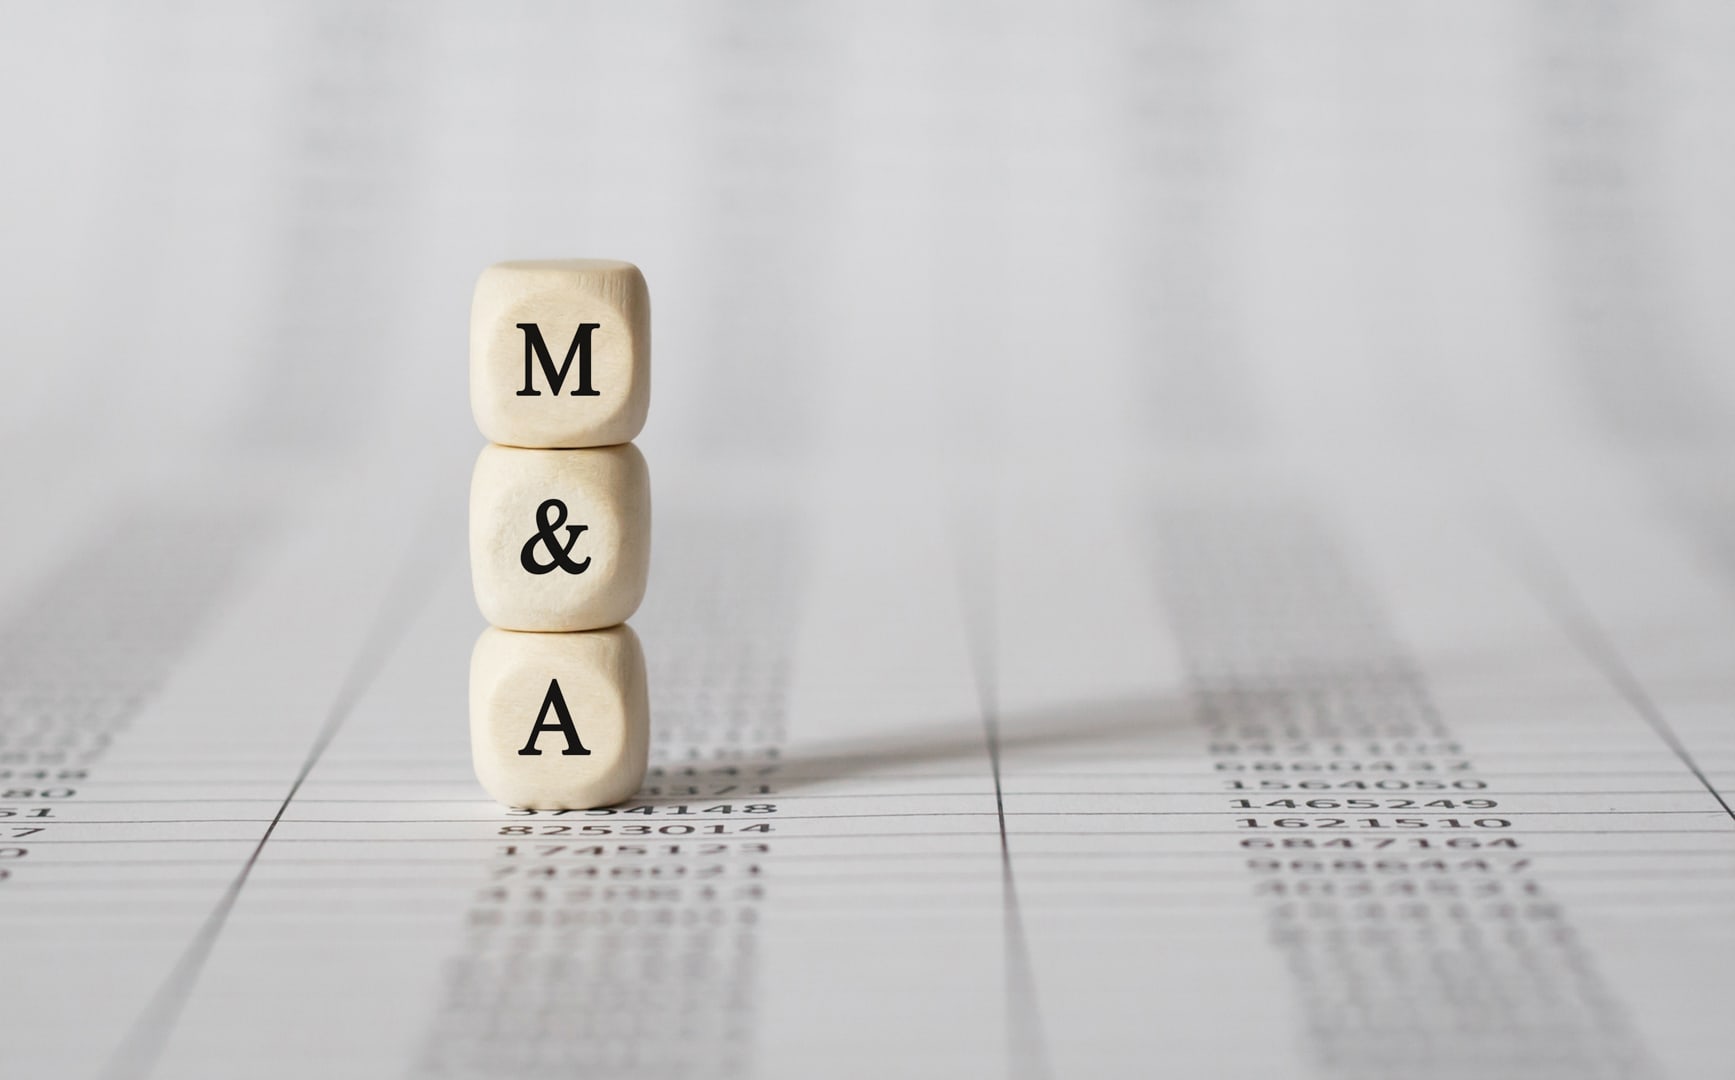 How to approach the M&A process for your company?